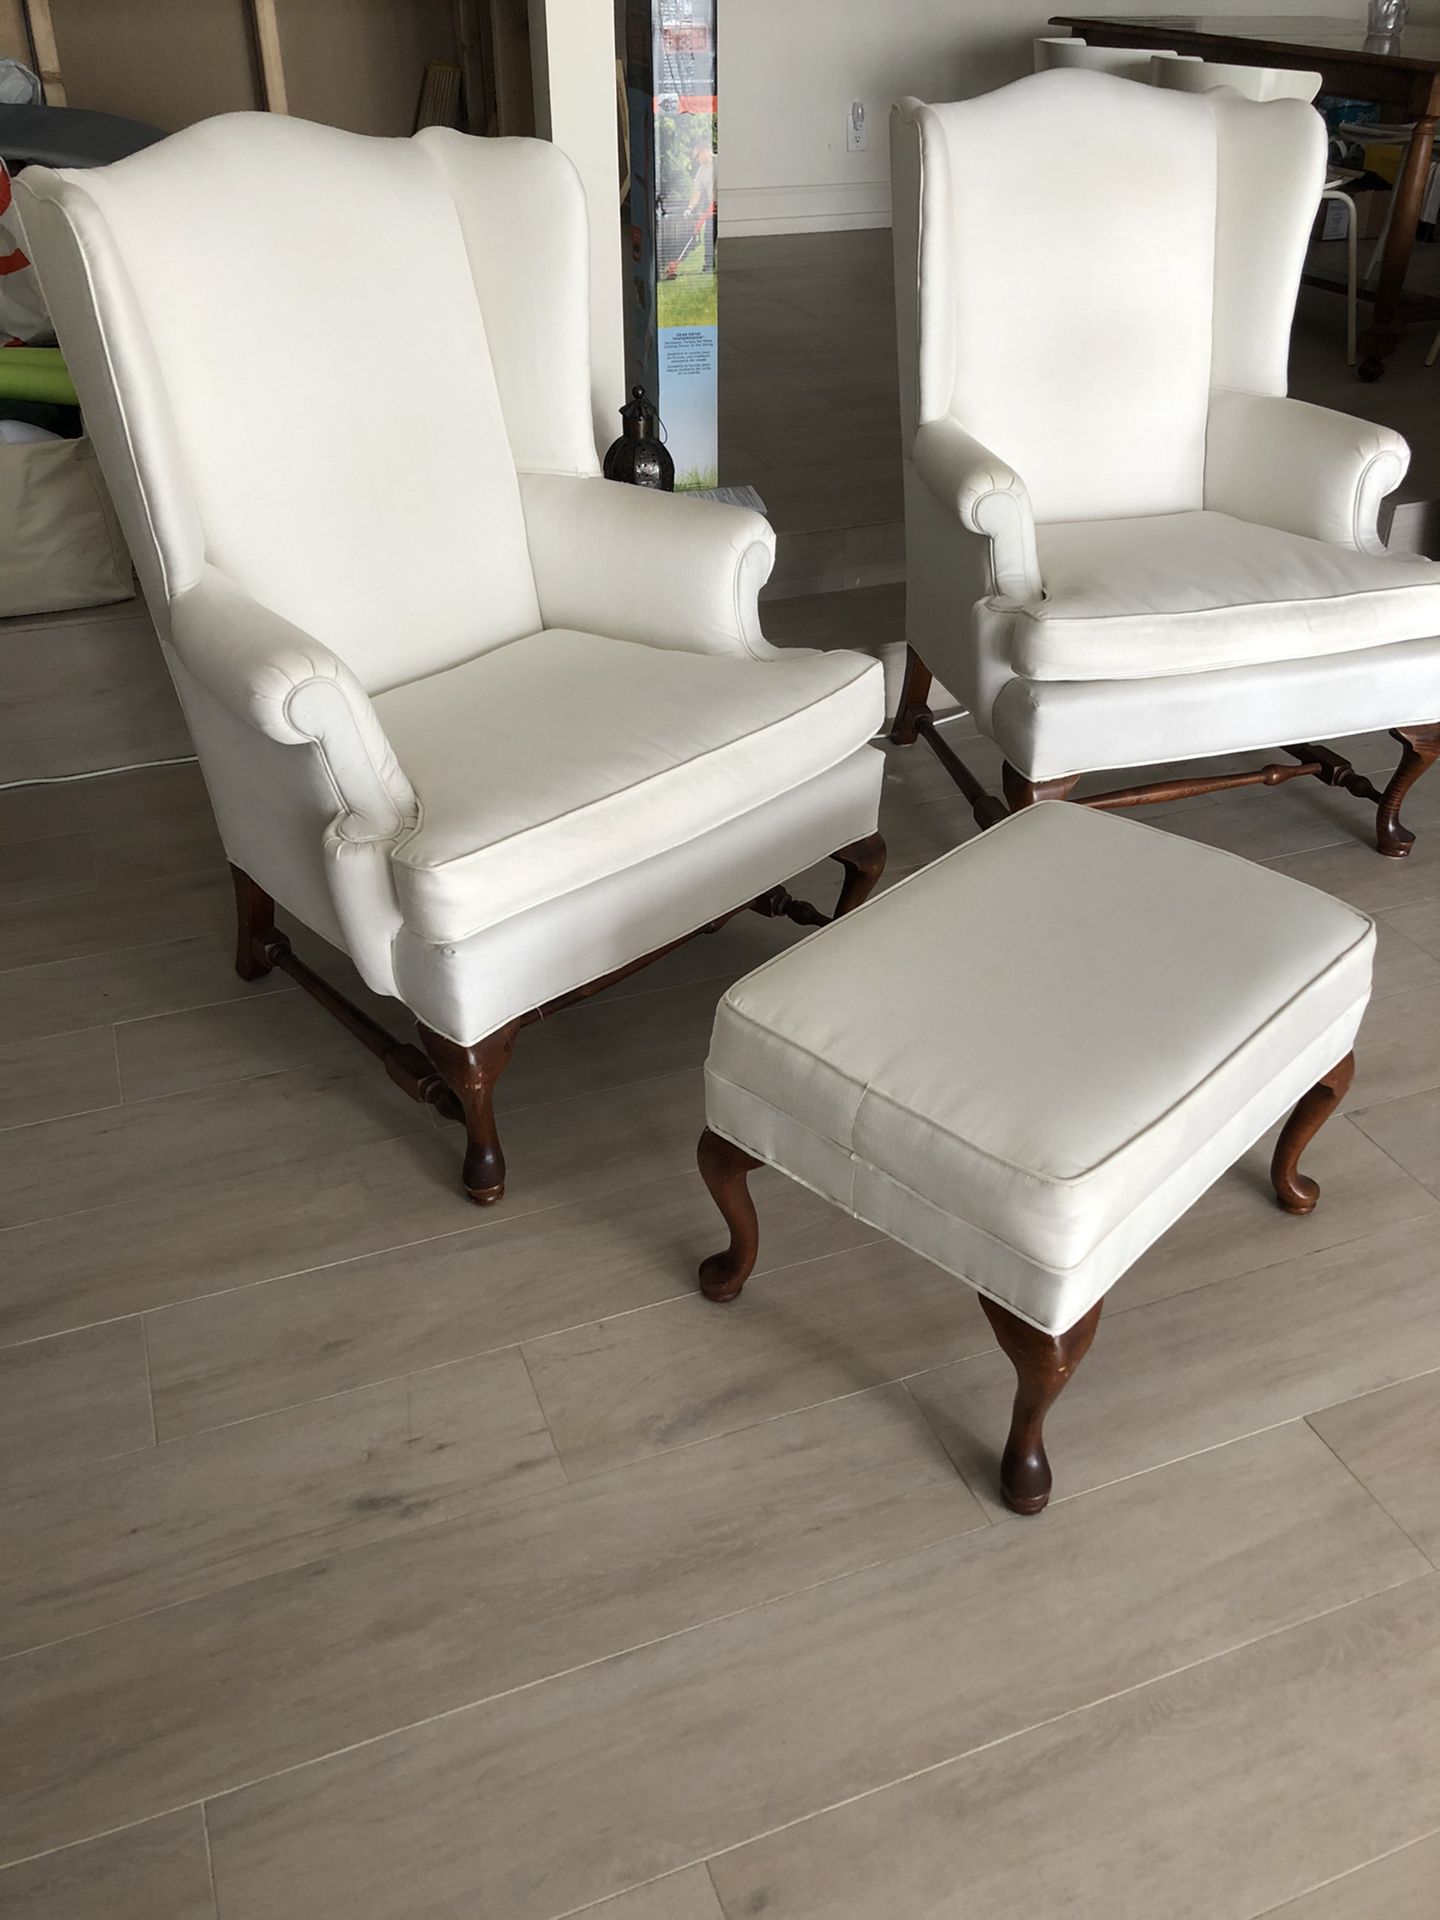 Ethan Allen wing chairs and ottoman